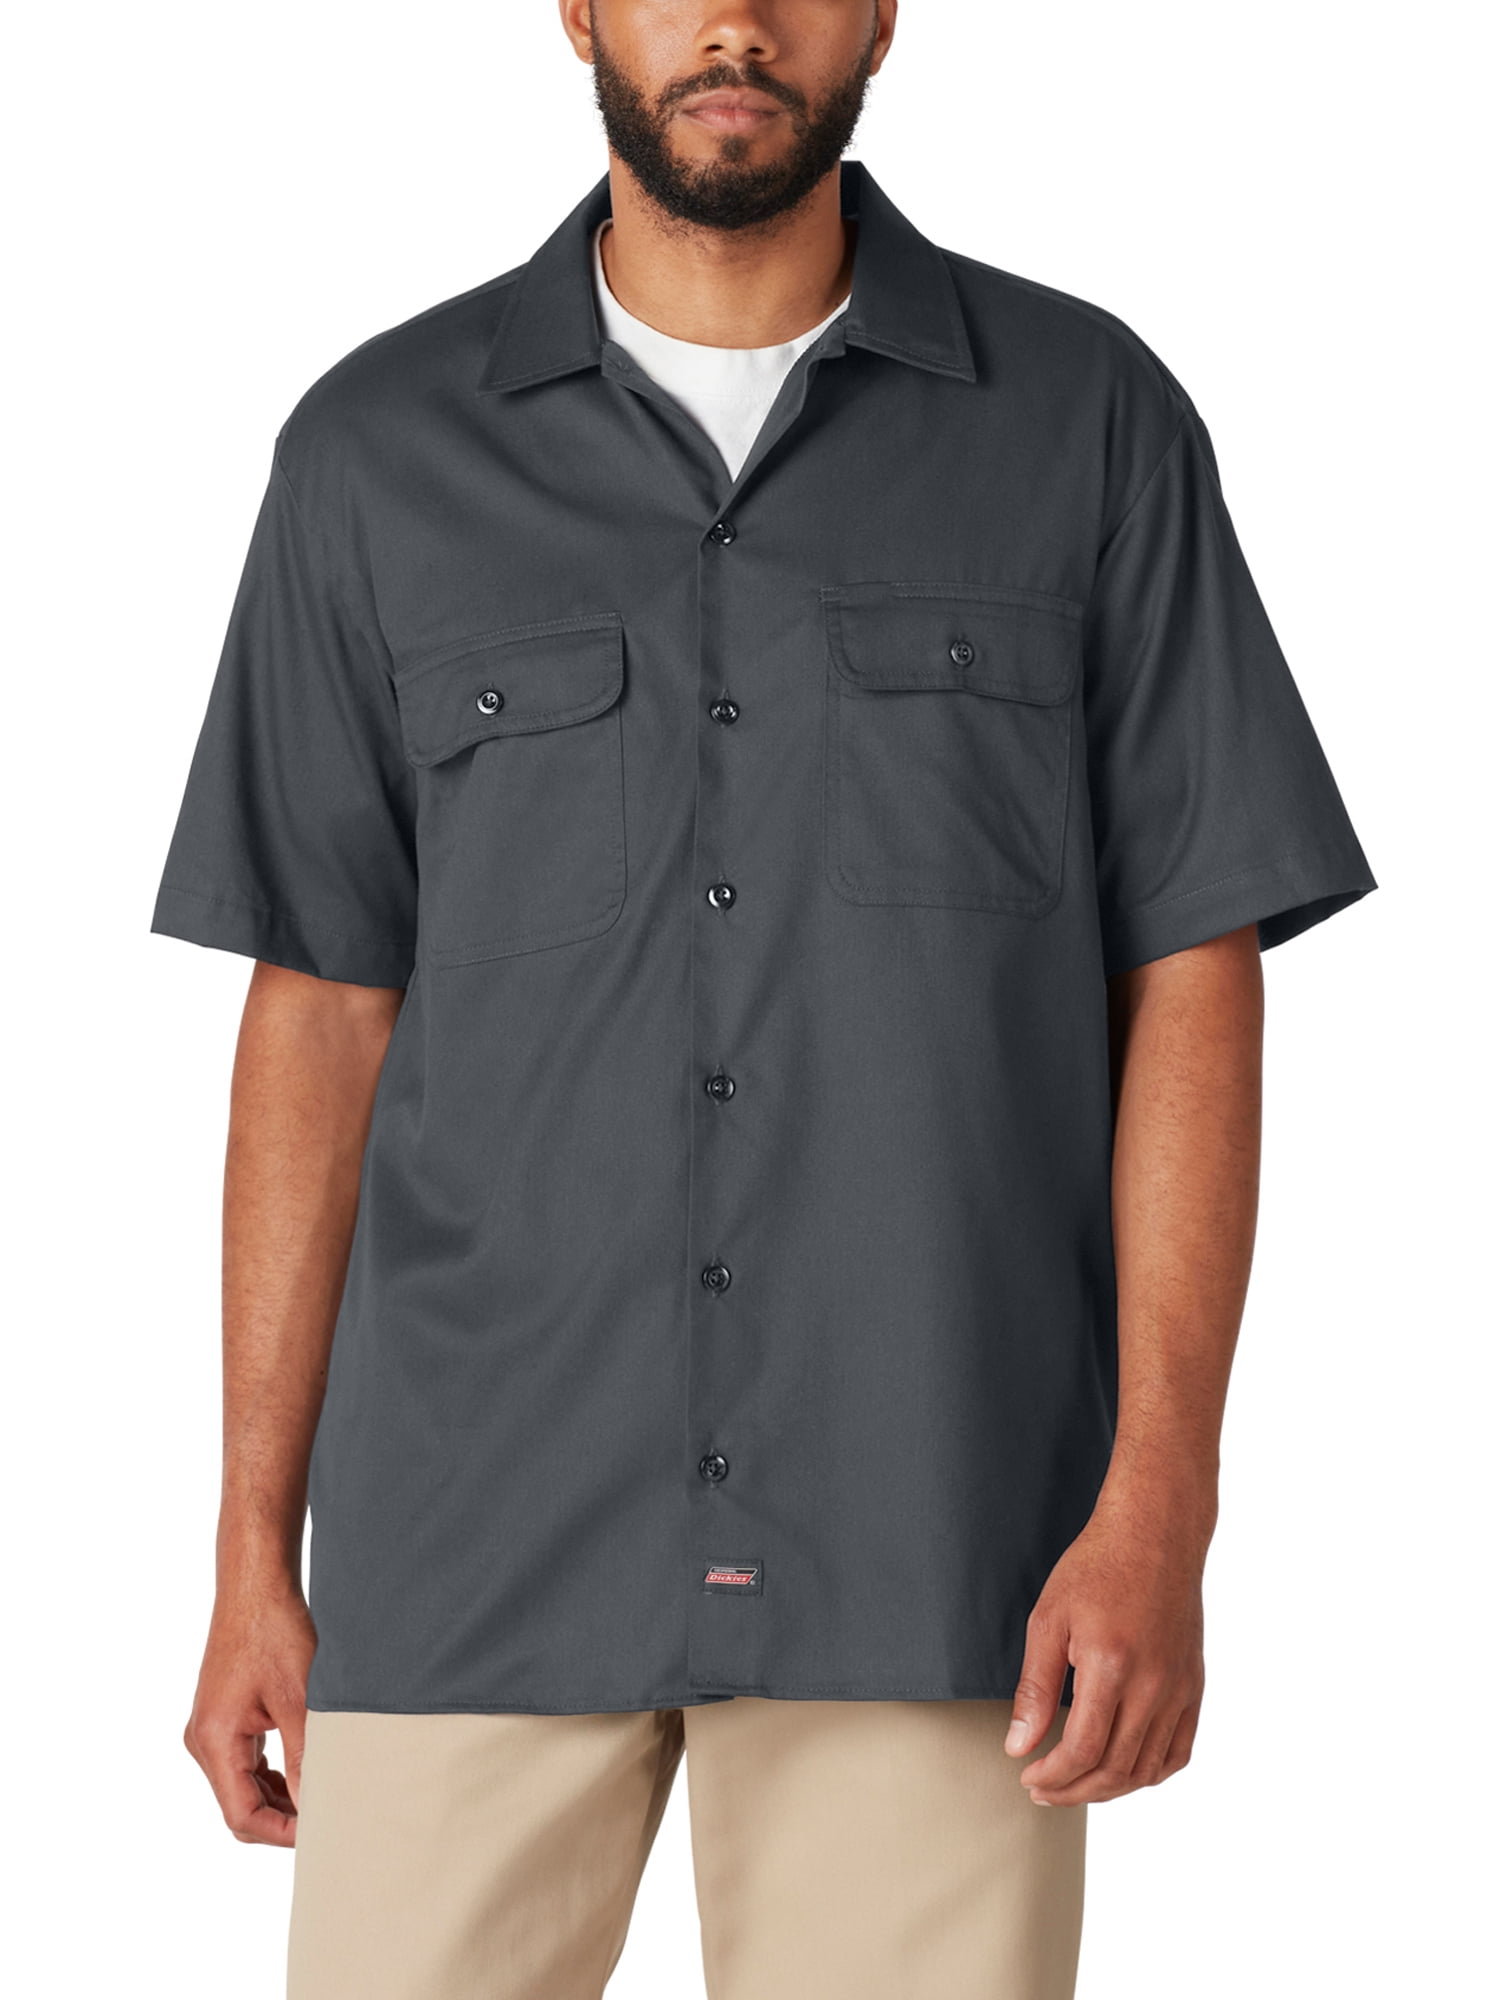 Custom Work Shirts That Are Durable and Will Last